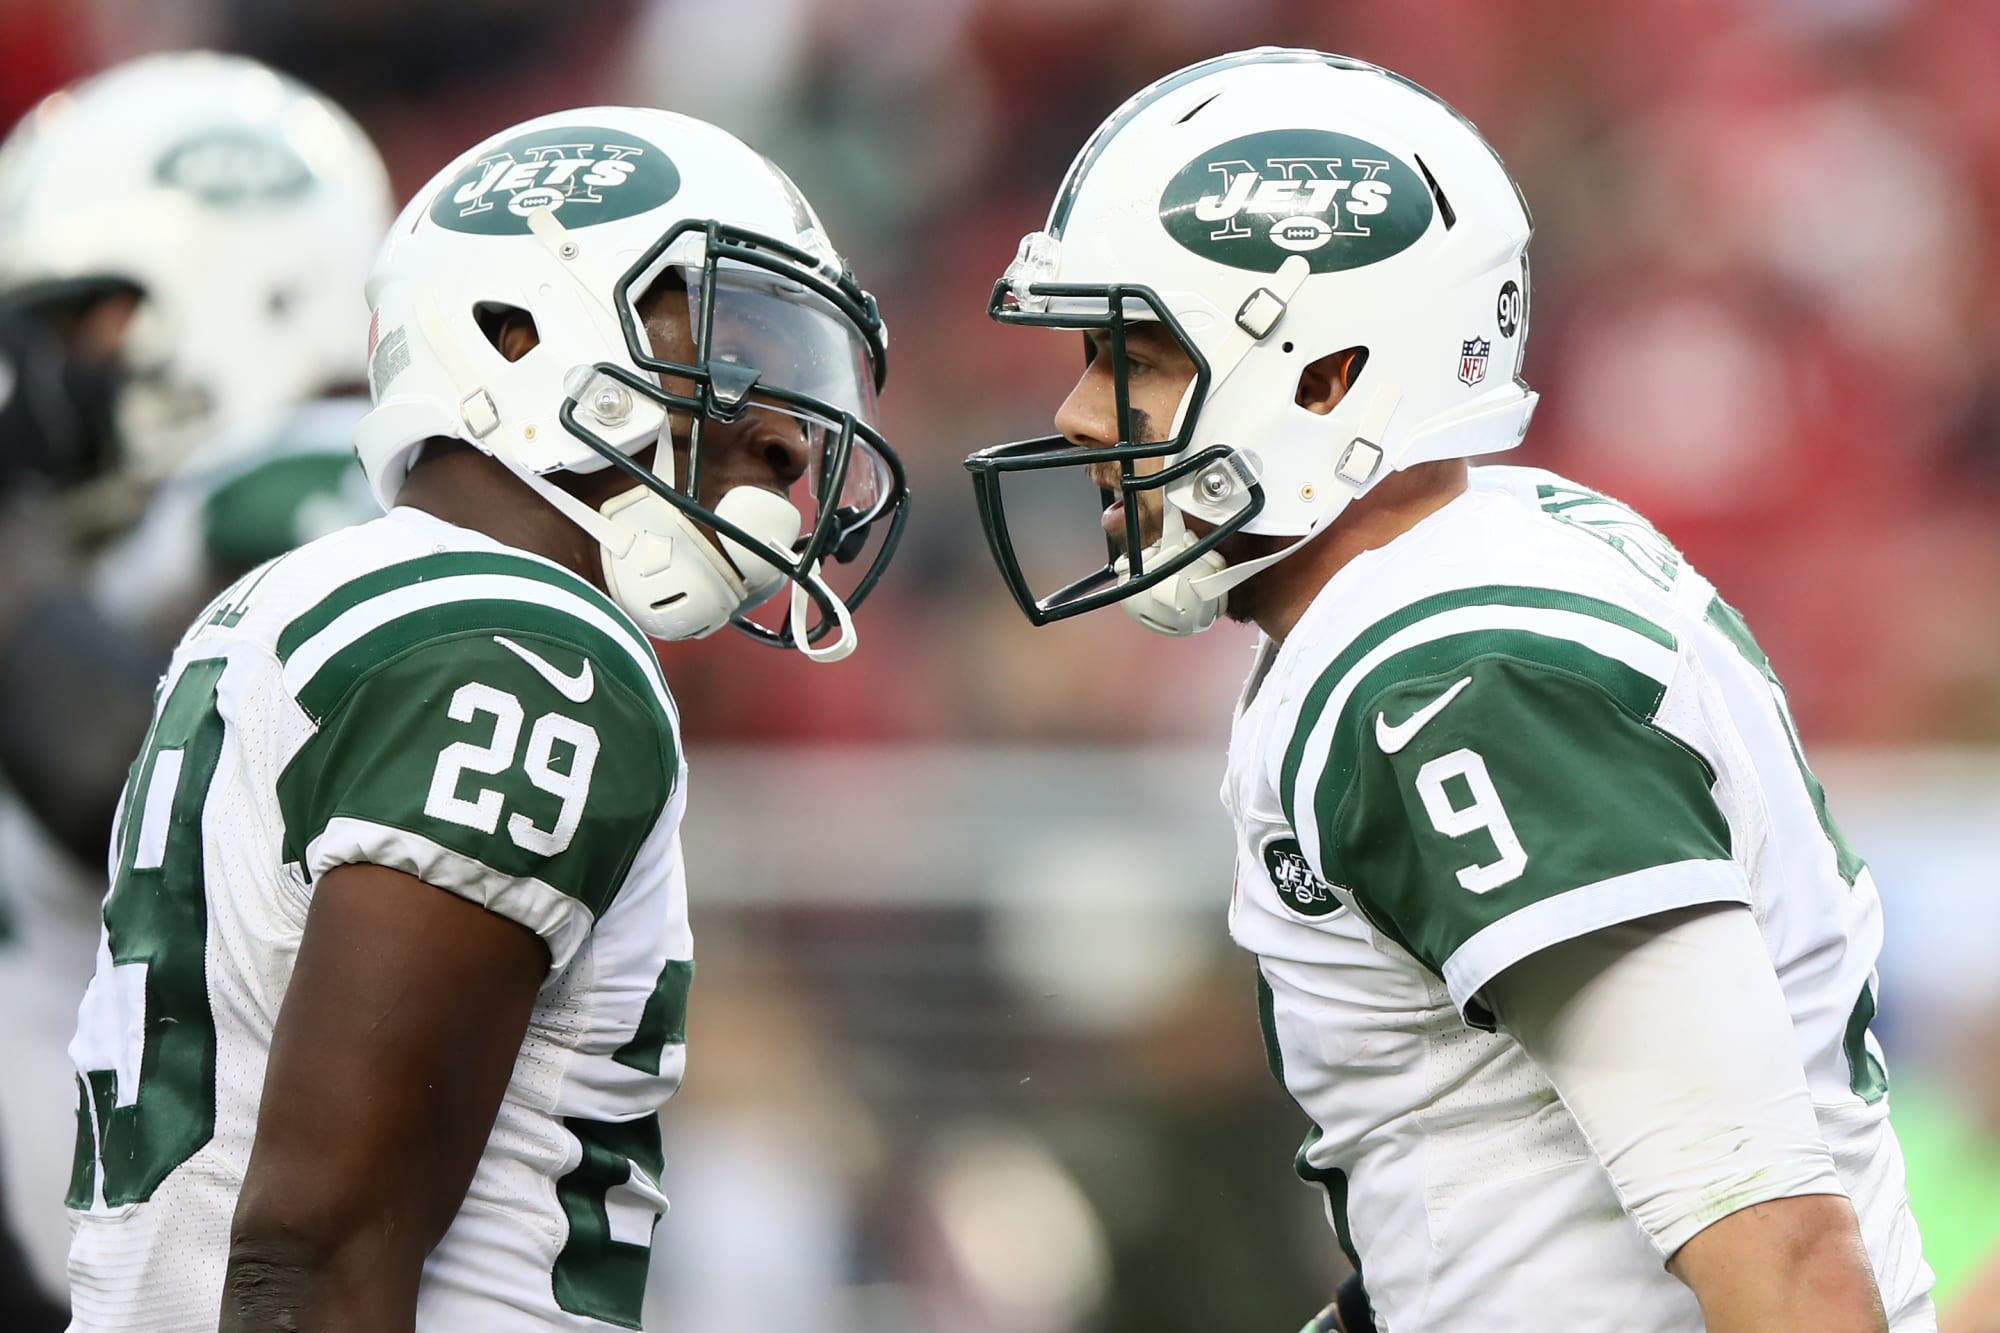 New York Jets vs. Detroit Lions What to watch for in Preseason Week 2